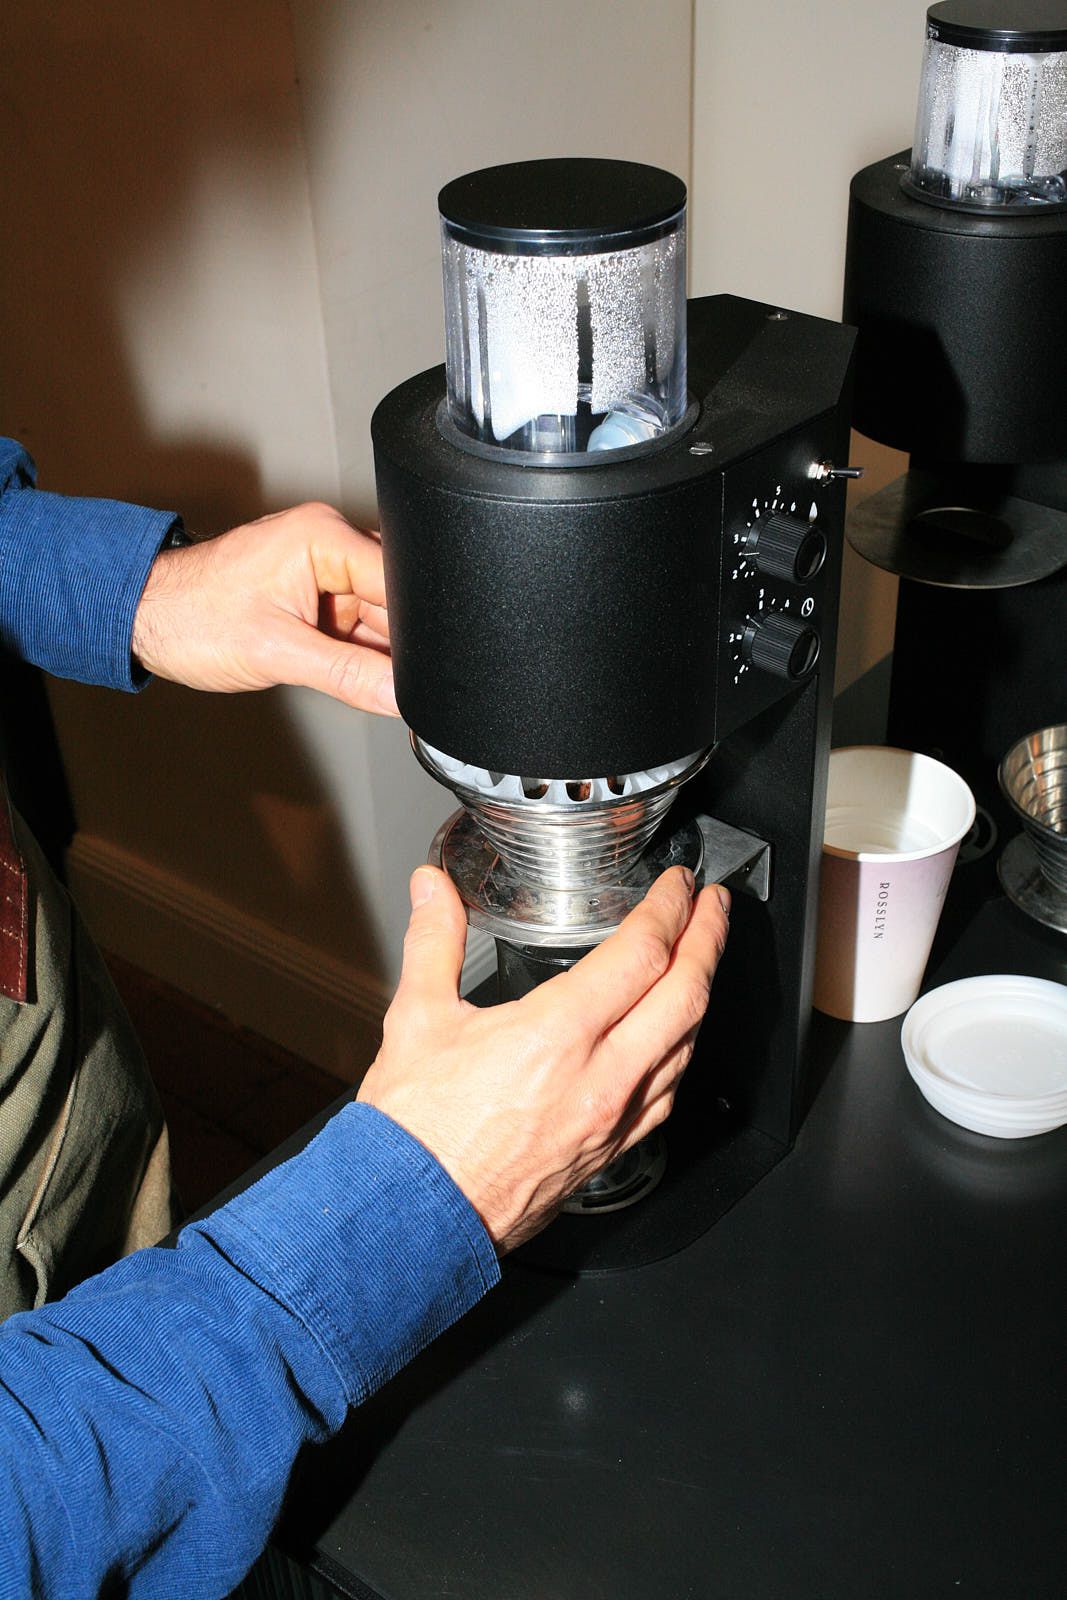 The dripper full of ground coffee is placed under a Marco SP9 brewer